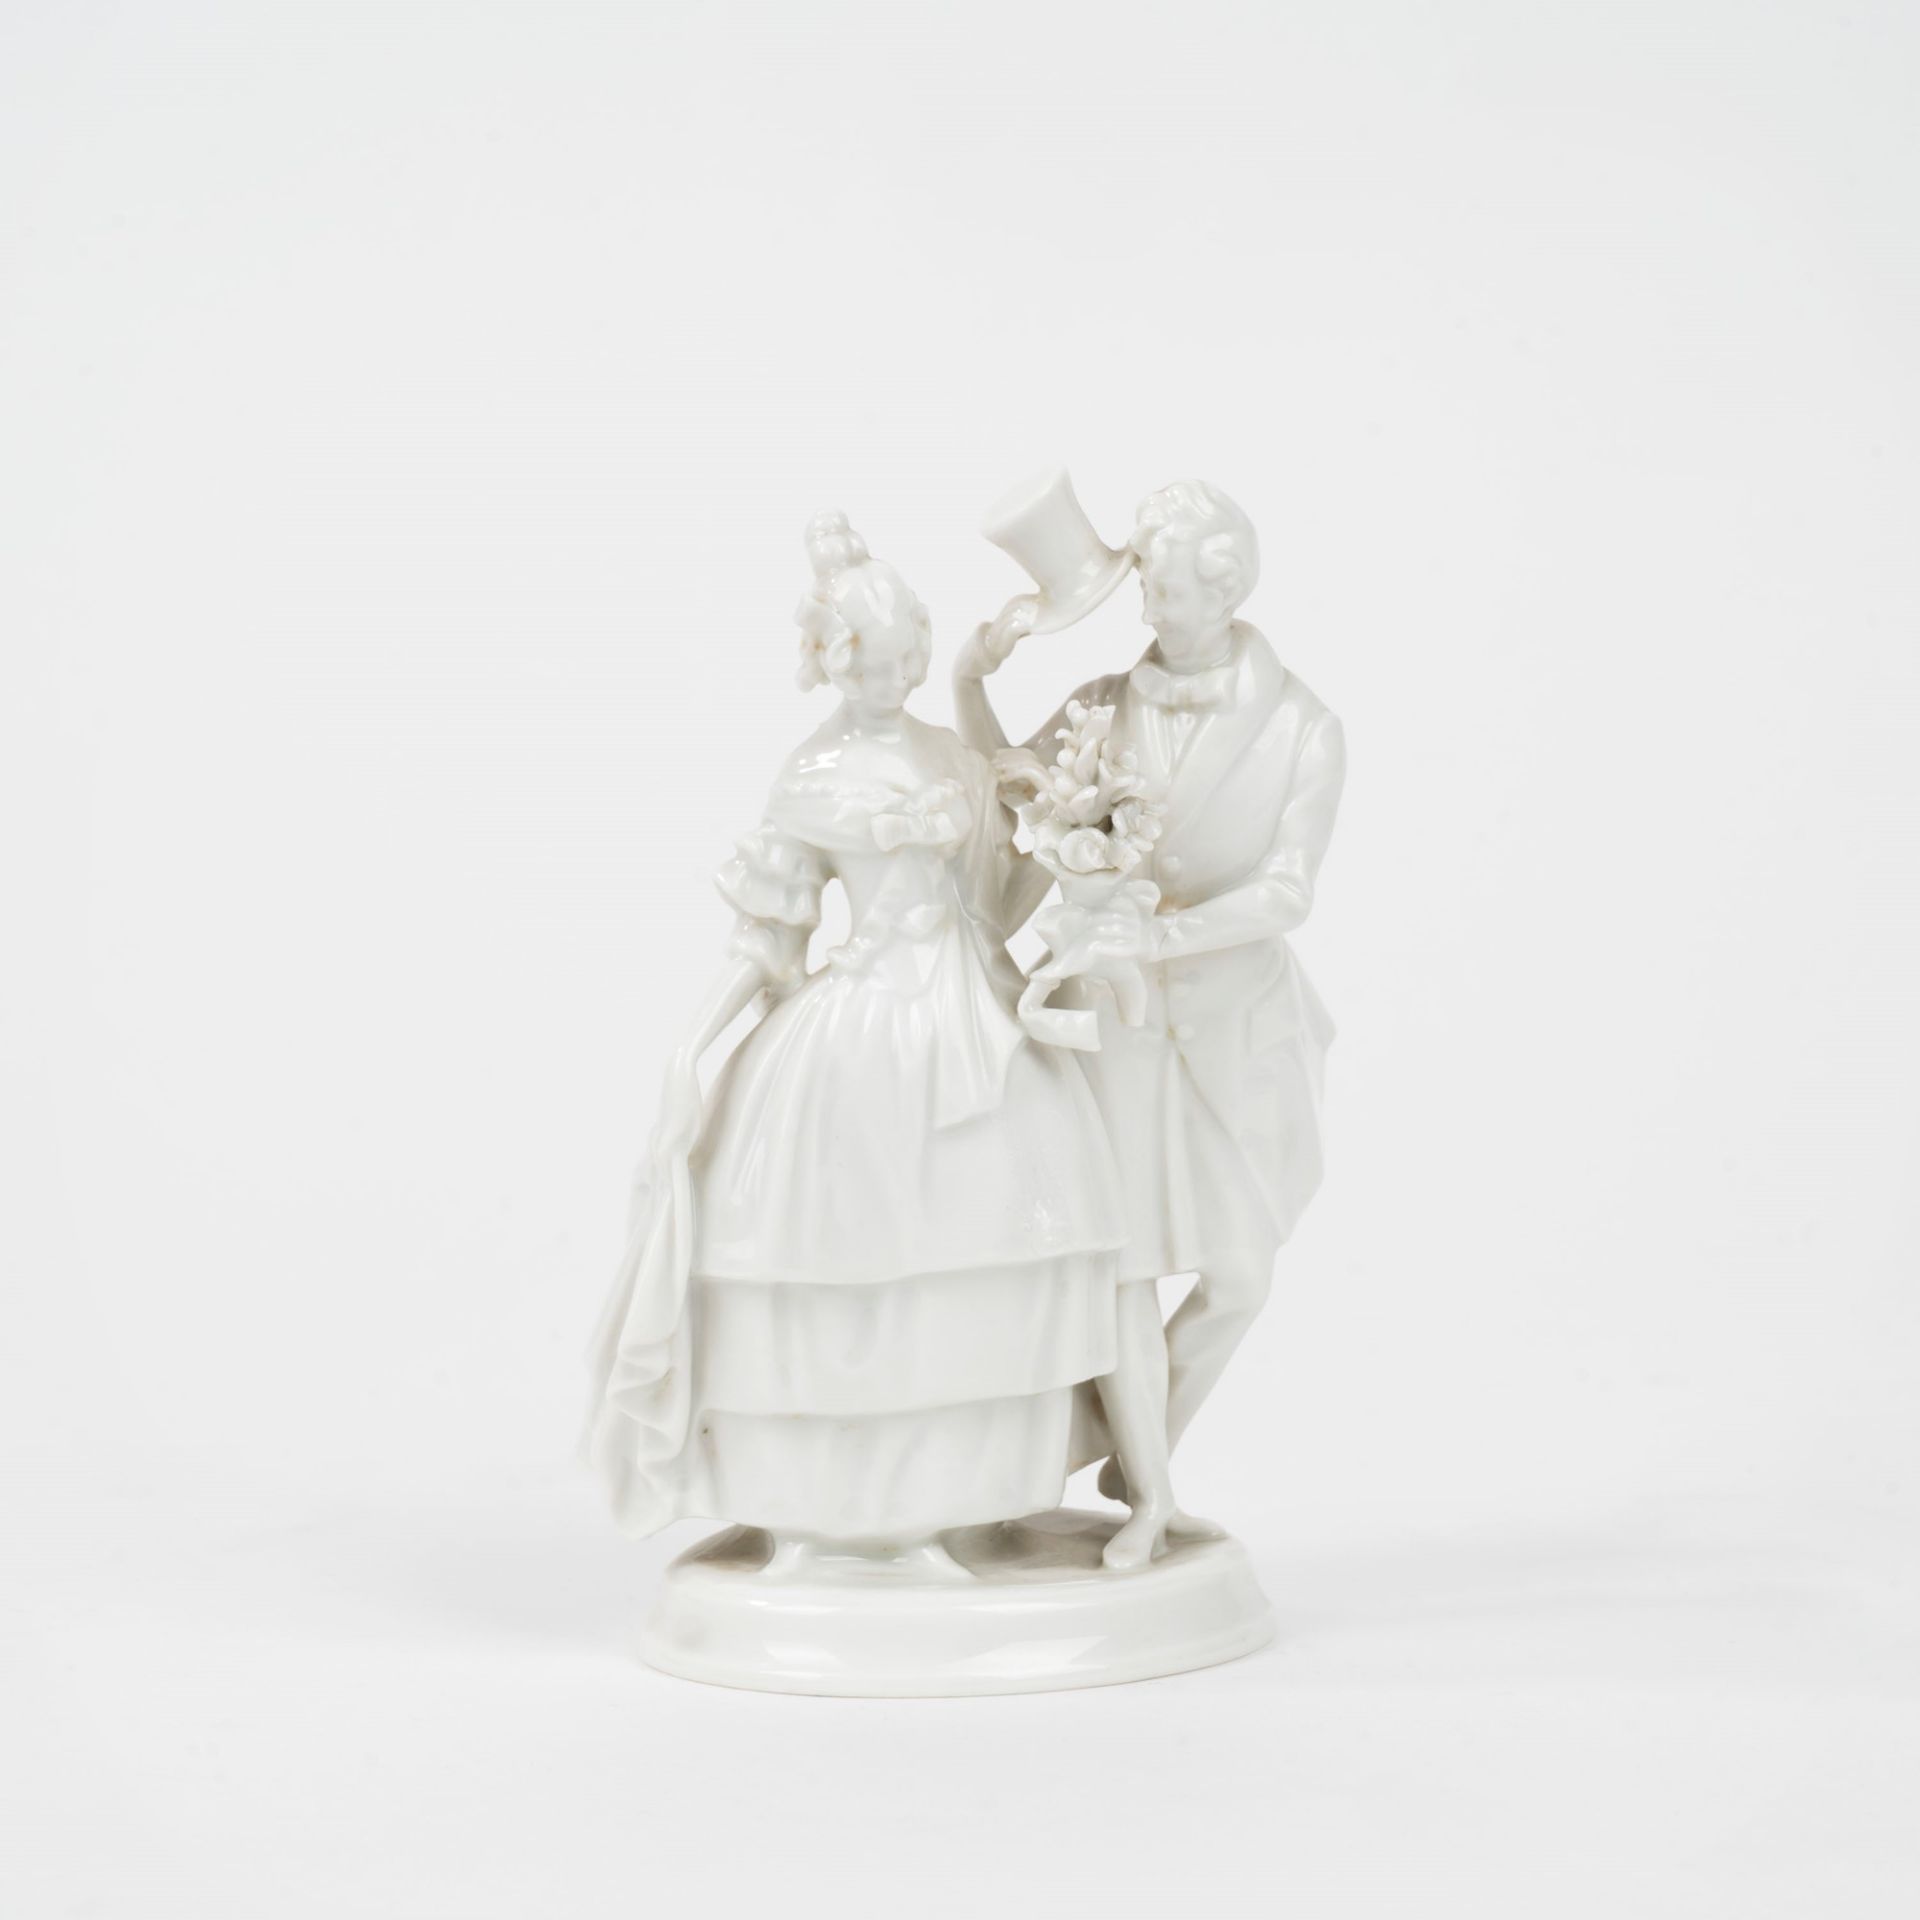 Lot consisting of seven white porcelain sculptures, 20th century - Image 5 of 10